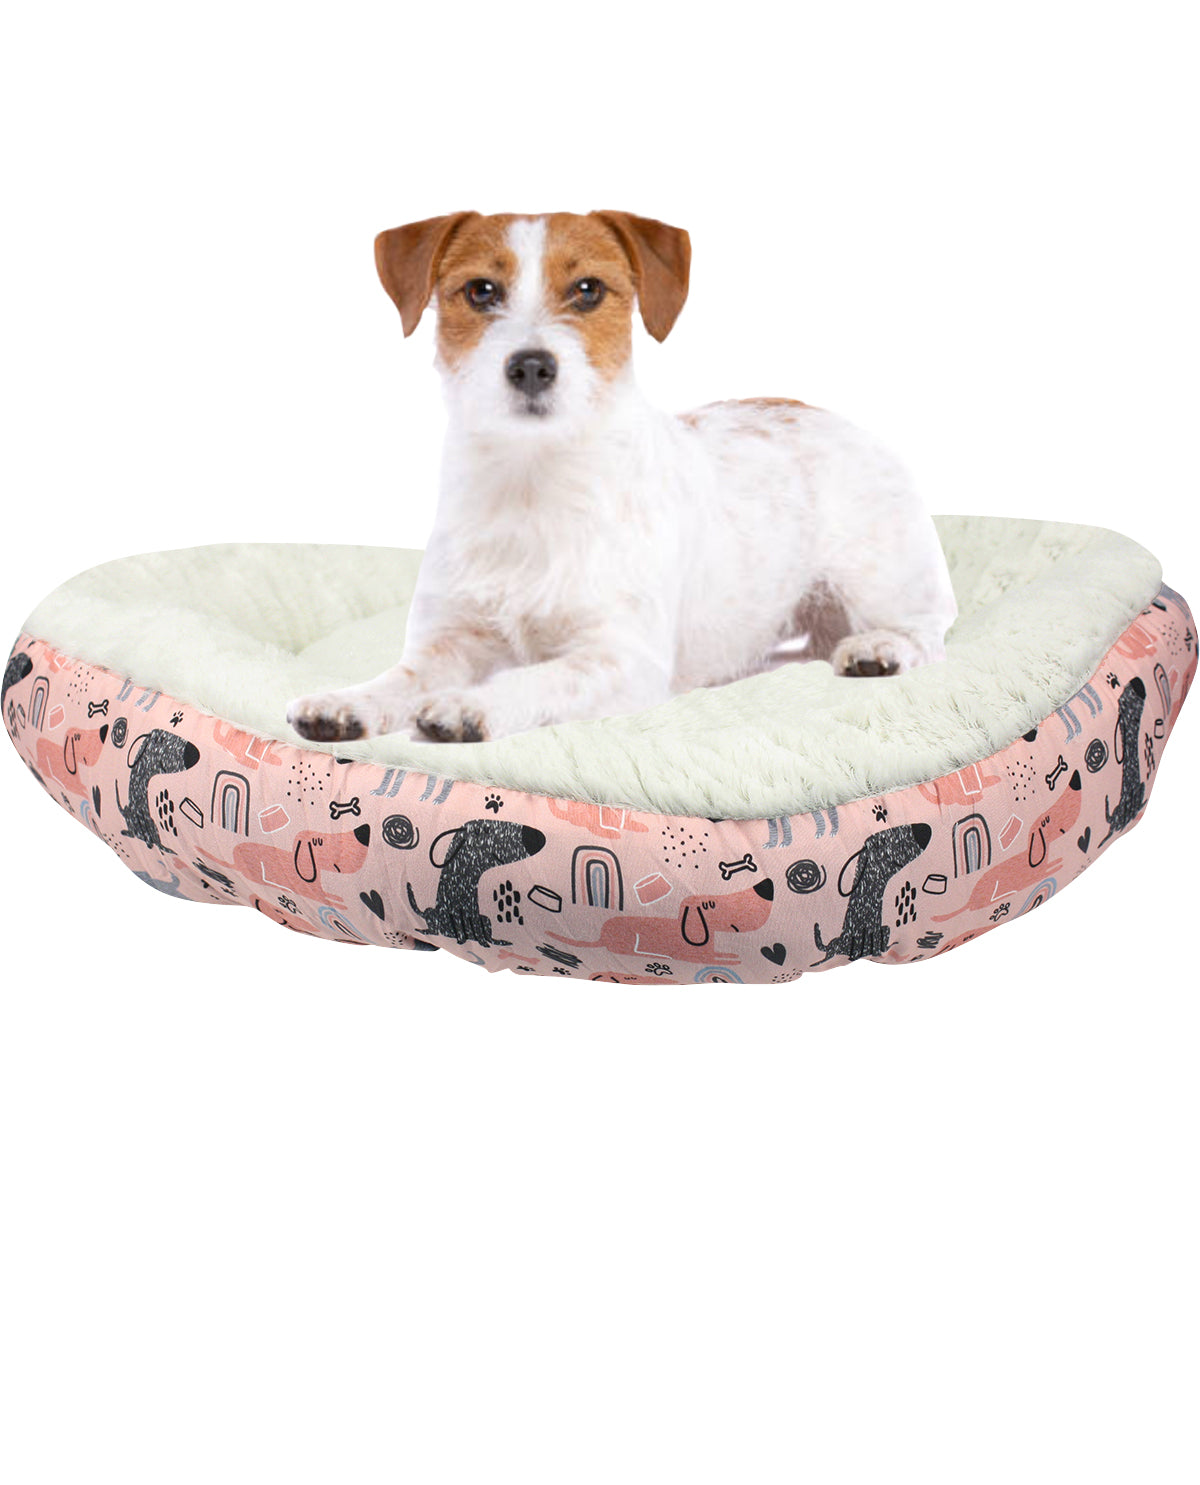 21.5" Round Pet Bed - Dogs and Rainbows - Blush